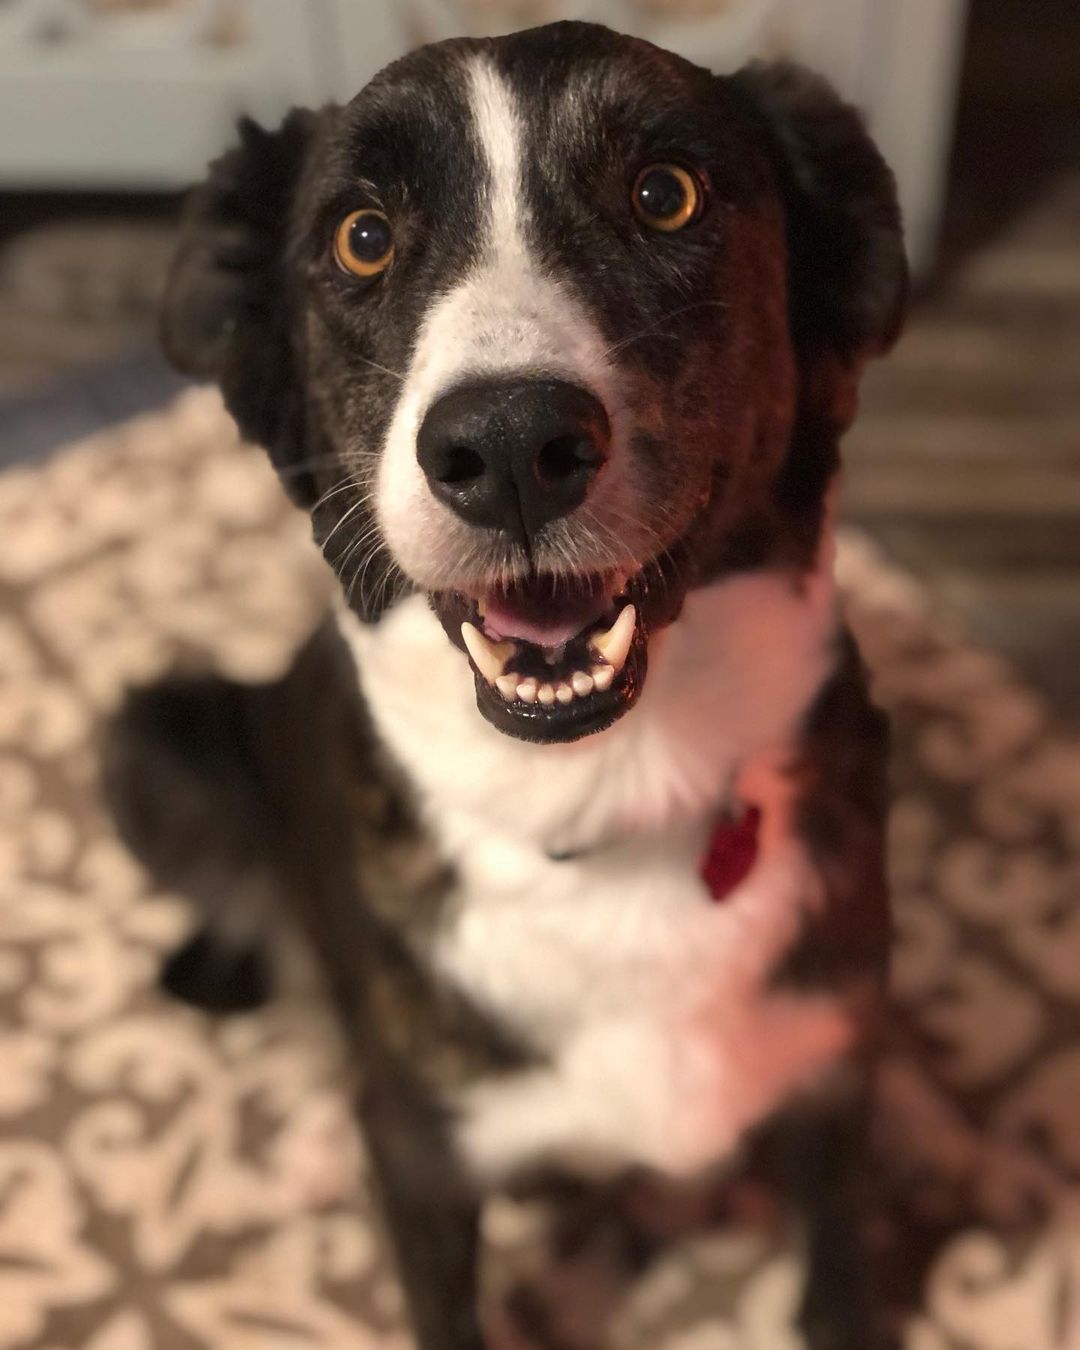 🌶 Pepper the wUnderdog foster dog is wishing you a good night ♥️ <a target='_blank' href='https://www.instagram.com/explore/tags/fosteringisfun/'>#fosteringisfun</a> <a target='_blank' href='https://www.instagram.com/explore/tags/dogs/'>#dogs</a> <a target='_blank' href='https://www.instagram.com/explore/tags/rescue/'>#rescue</a> <a target='_blank' href='https://www.instagram.com/explore/tags/adopt/'>#adopt</a> <a target='_blank' href='https://www.instagram.com/explore/tags/subarupacific/'>#subarupacific</a> <a target='_blank' href='https://www.instagram.com/explore/tags/gonetothedogsrescue/'>#gonetothedogsrescue</a> <a target='_blank' href='https://www.instagram.com/explore/tags/makeadogsday/'>#makeadogsday</a> <a target='_blank' href='https://www.instagram.com/explore/tags/nitenite/'>#nitenite</a>